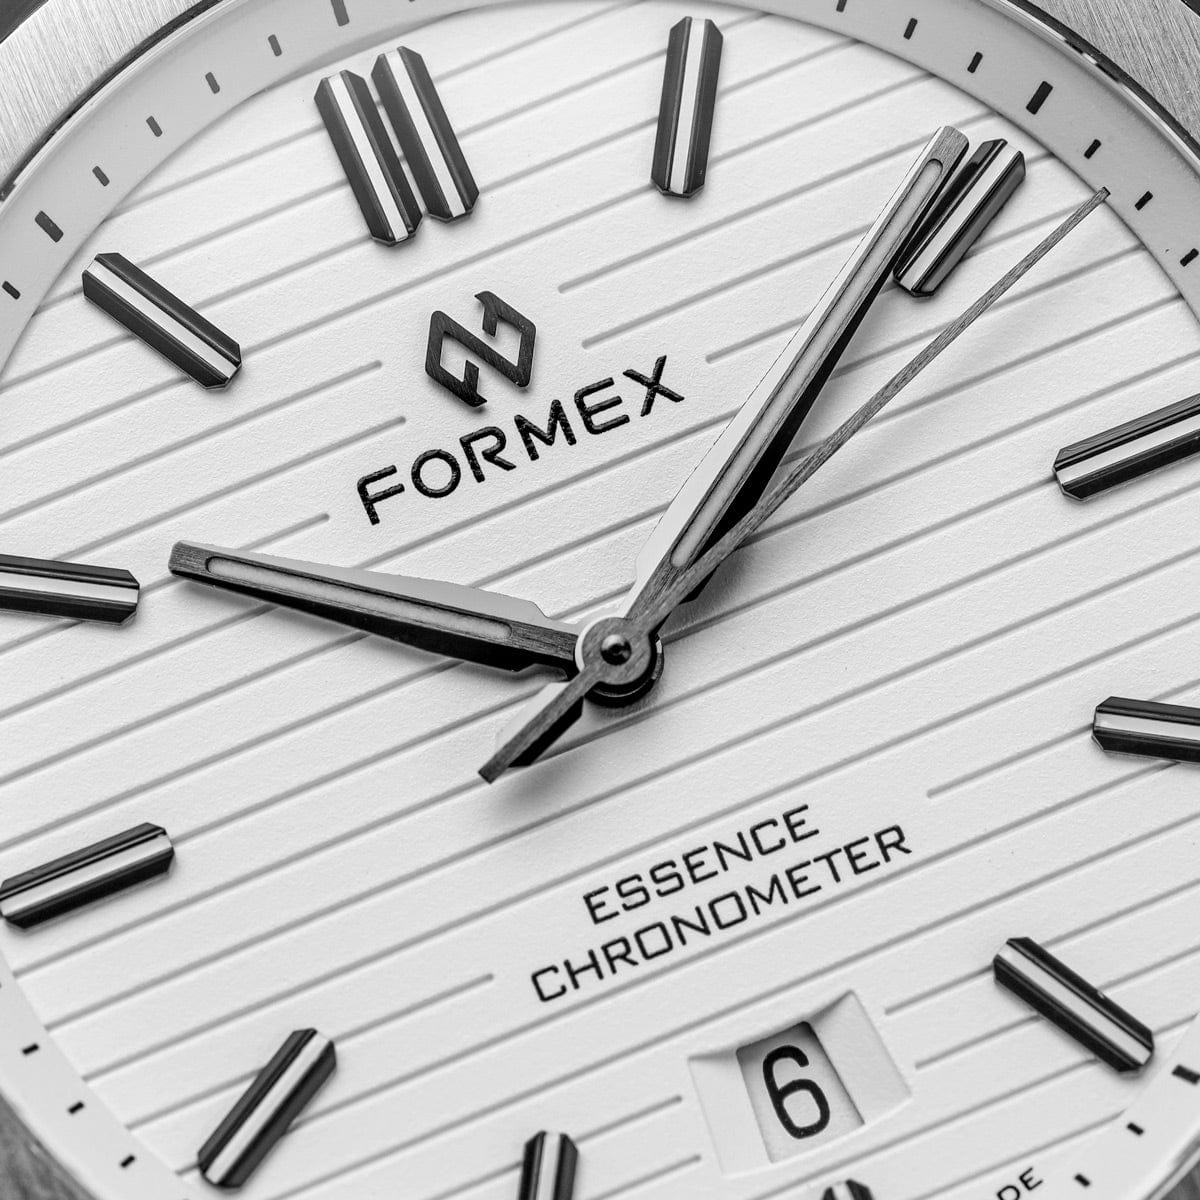 Formex Essence 43 Automatic Chronometer - Green - NEARLY NEW